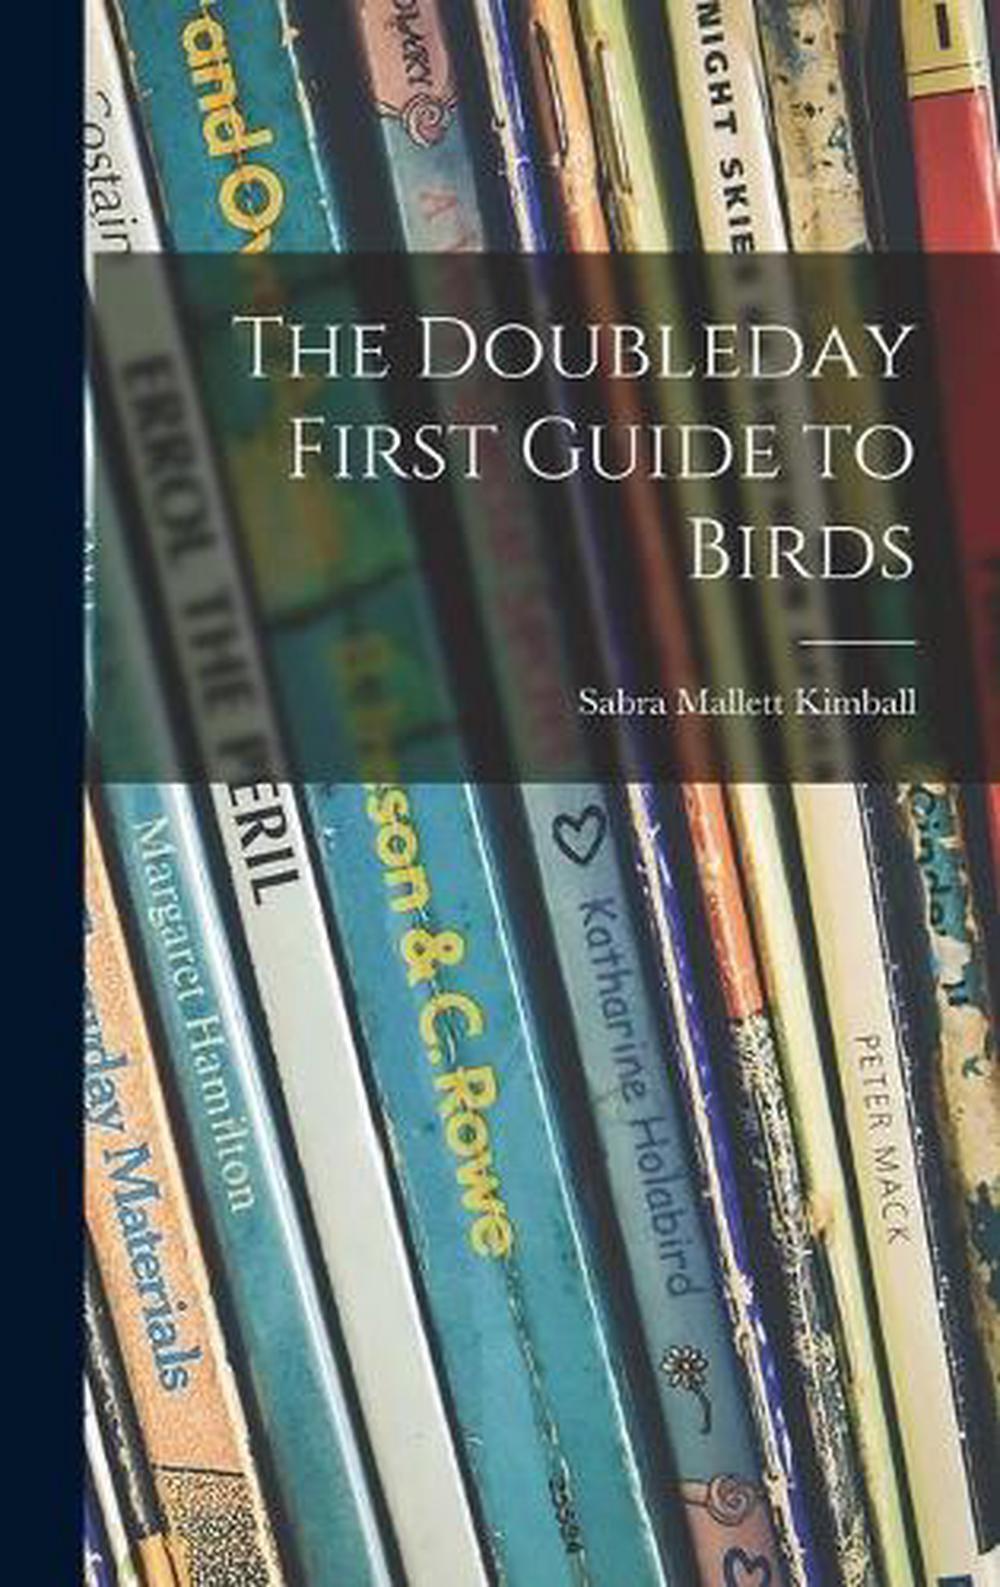 The Doubleday First Guide to Birds by Sabra Mallett 1904- Kimball Hardcover Book